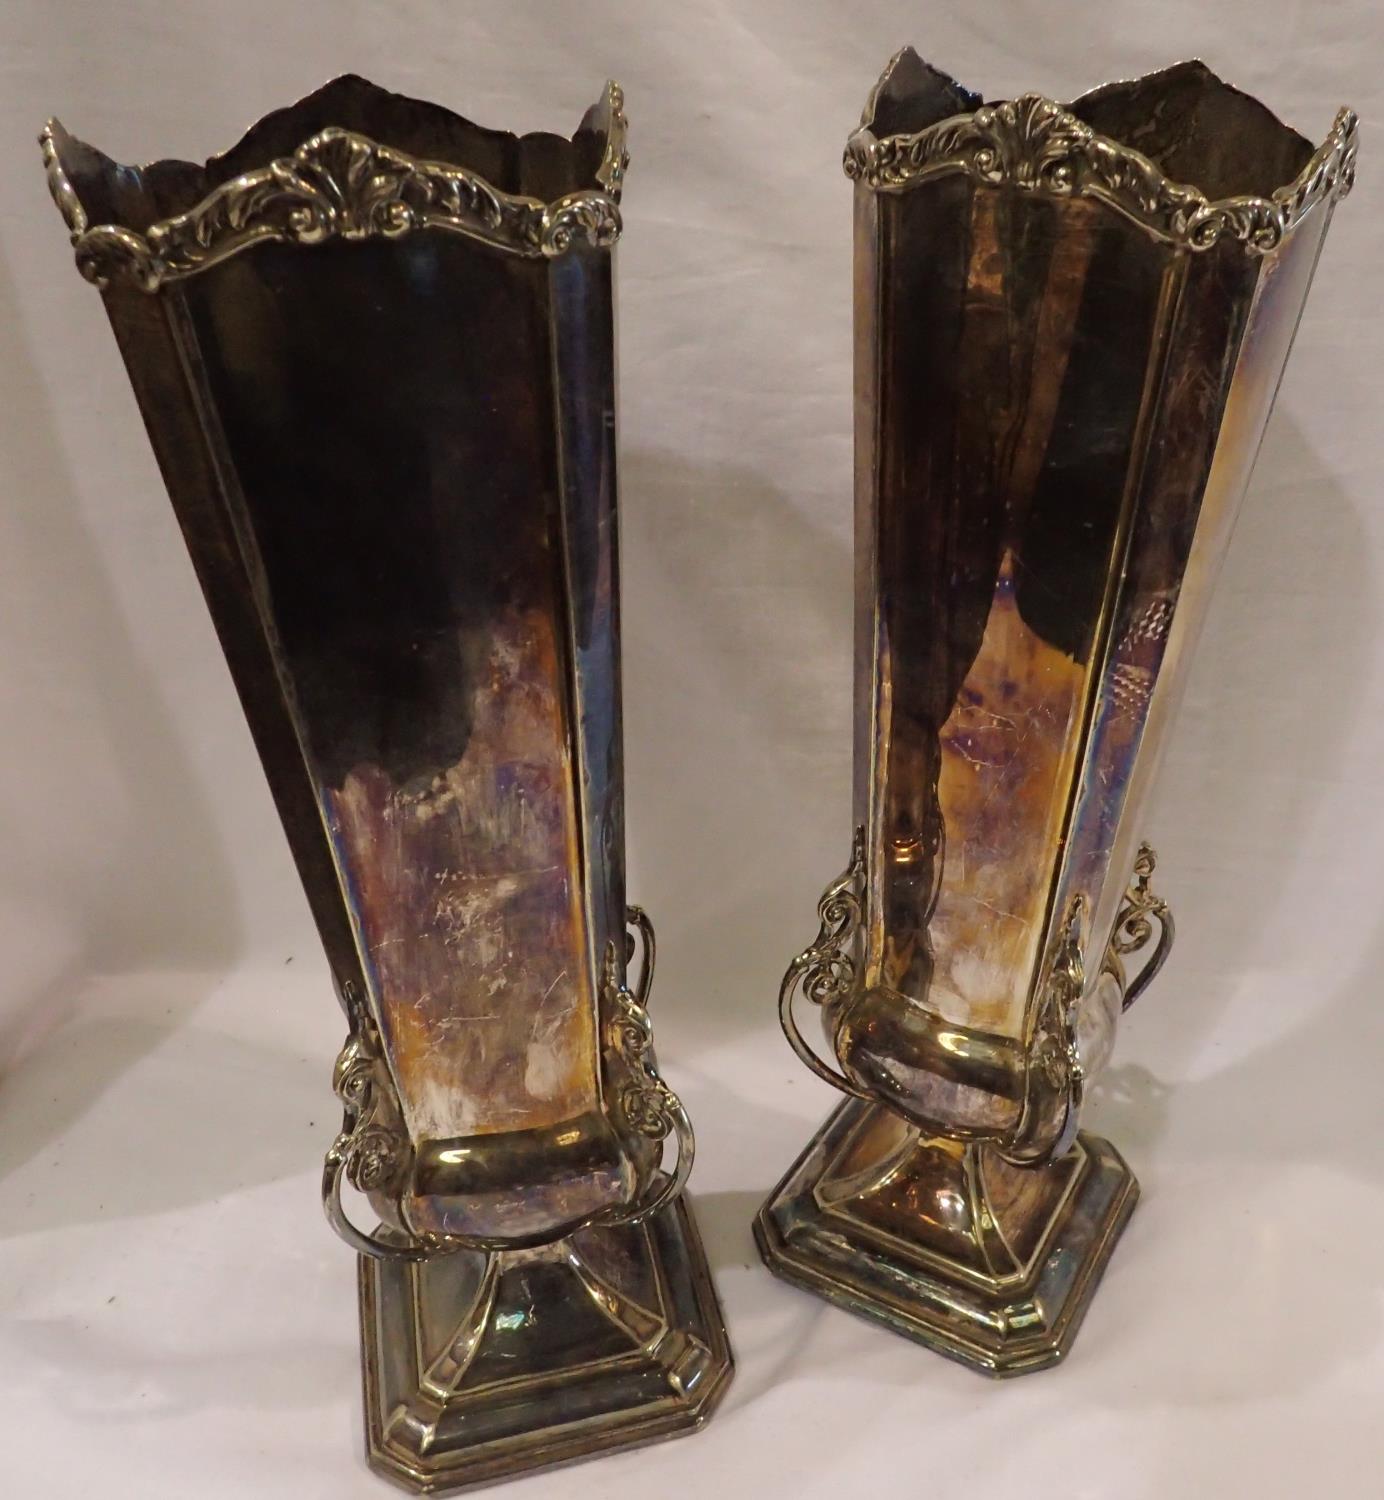 Pair of silver plated vases, H: 27 cm. P&P Group 1 (£14+VAT for the first lot and £1+VAT for